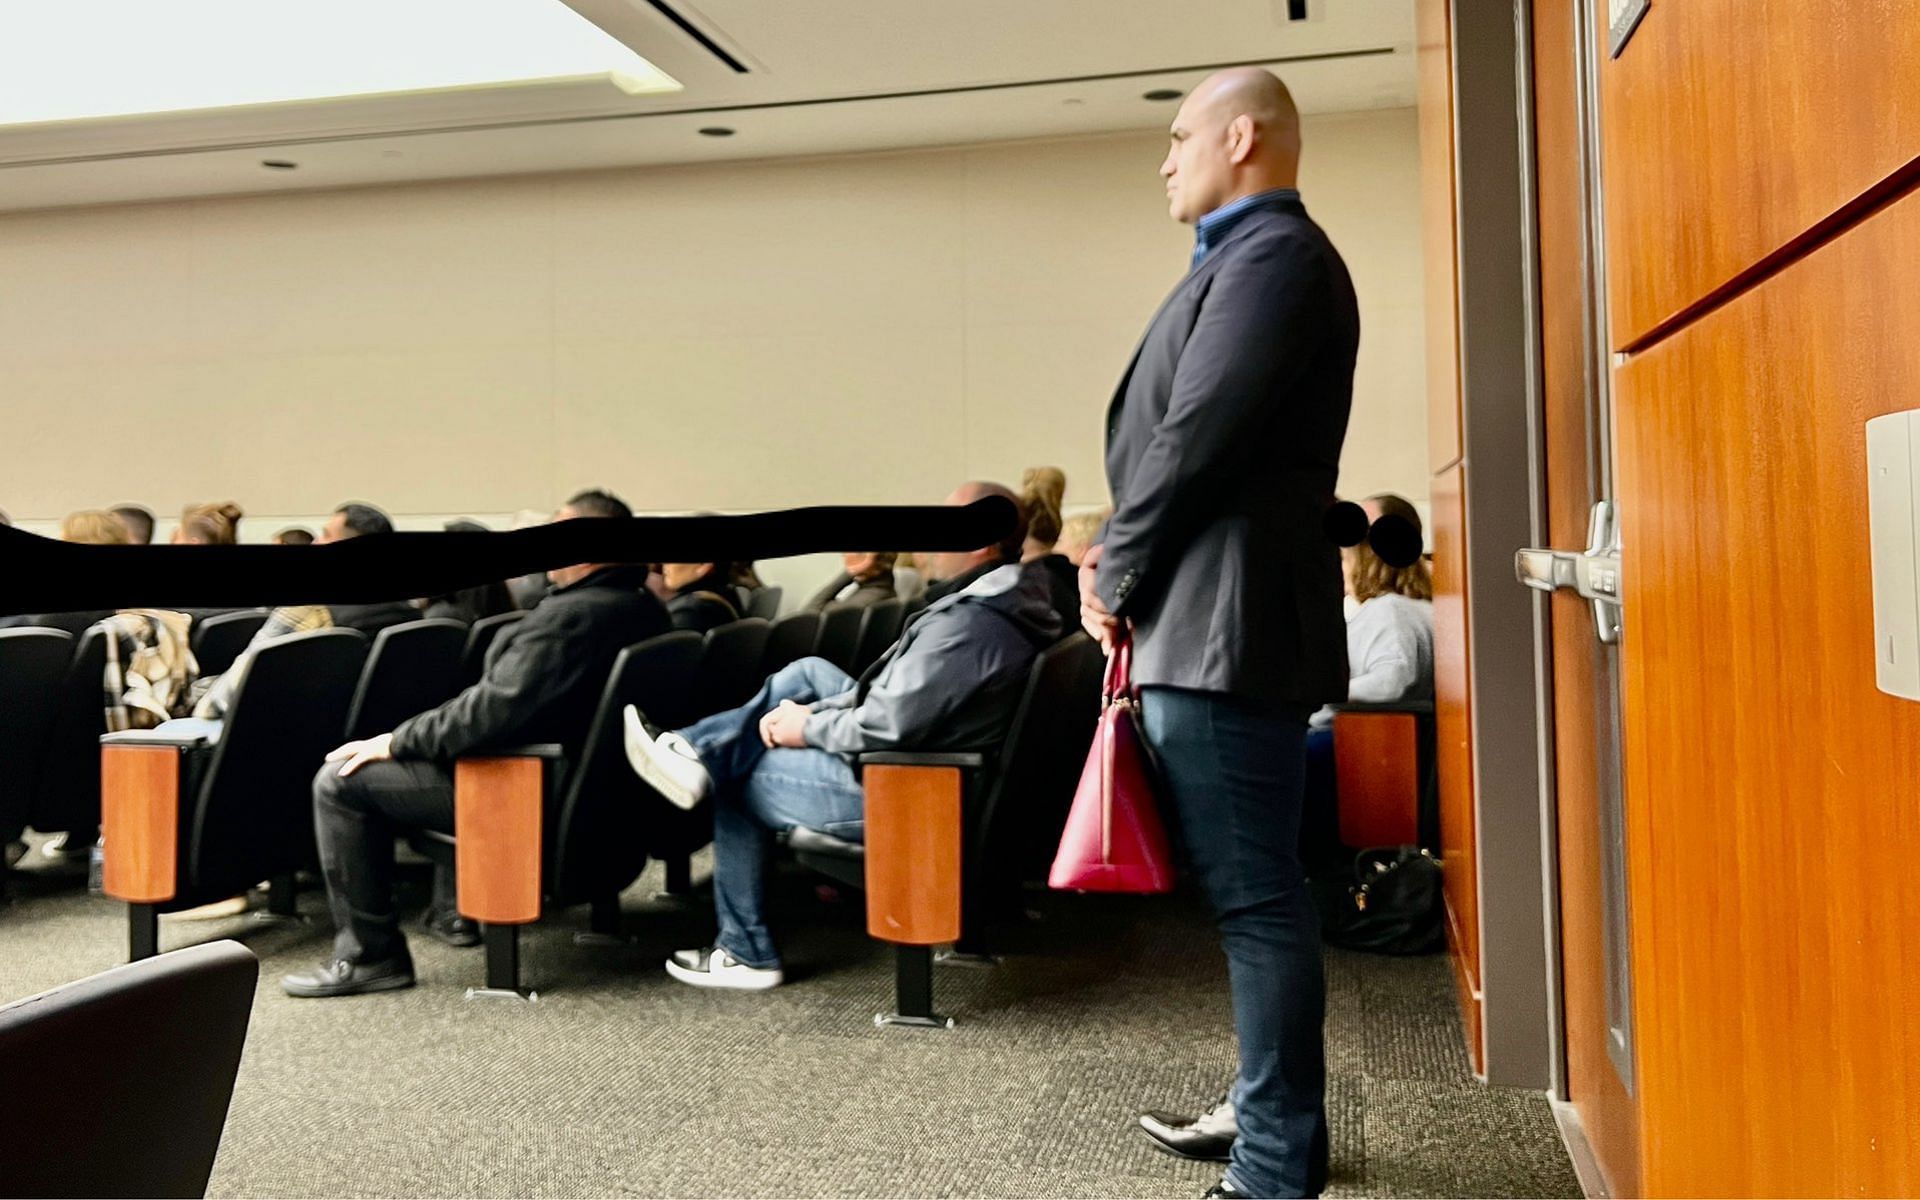 Cain Velasquez attends court as his son testifies [Image courtesy: @newsdamian on Twitter]